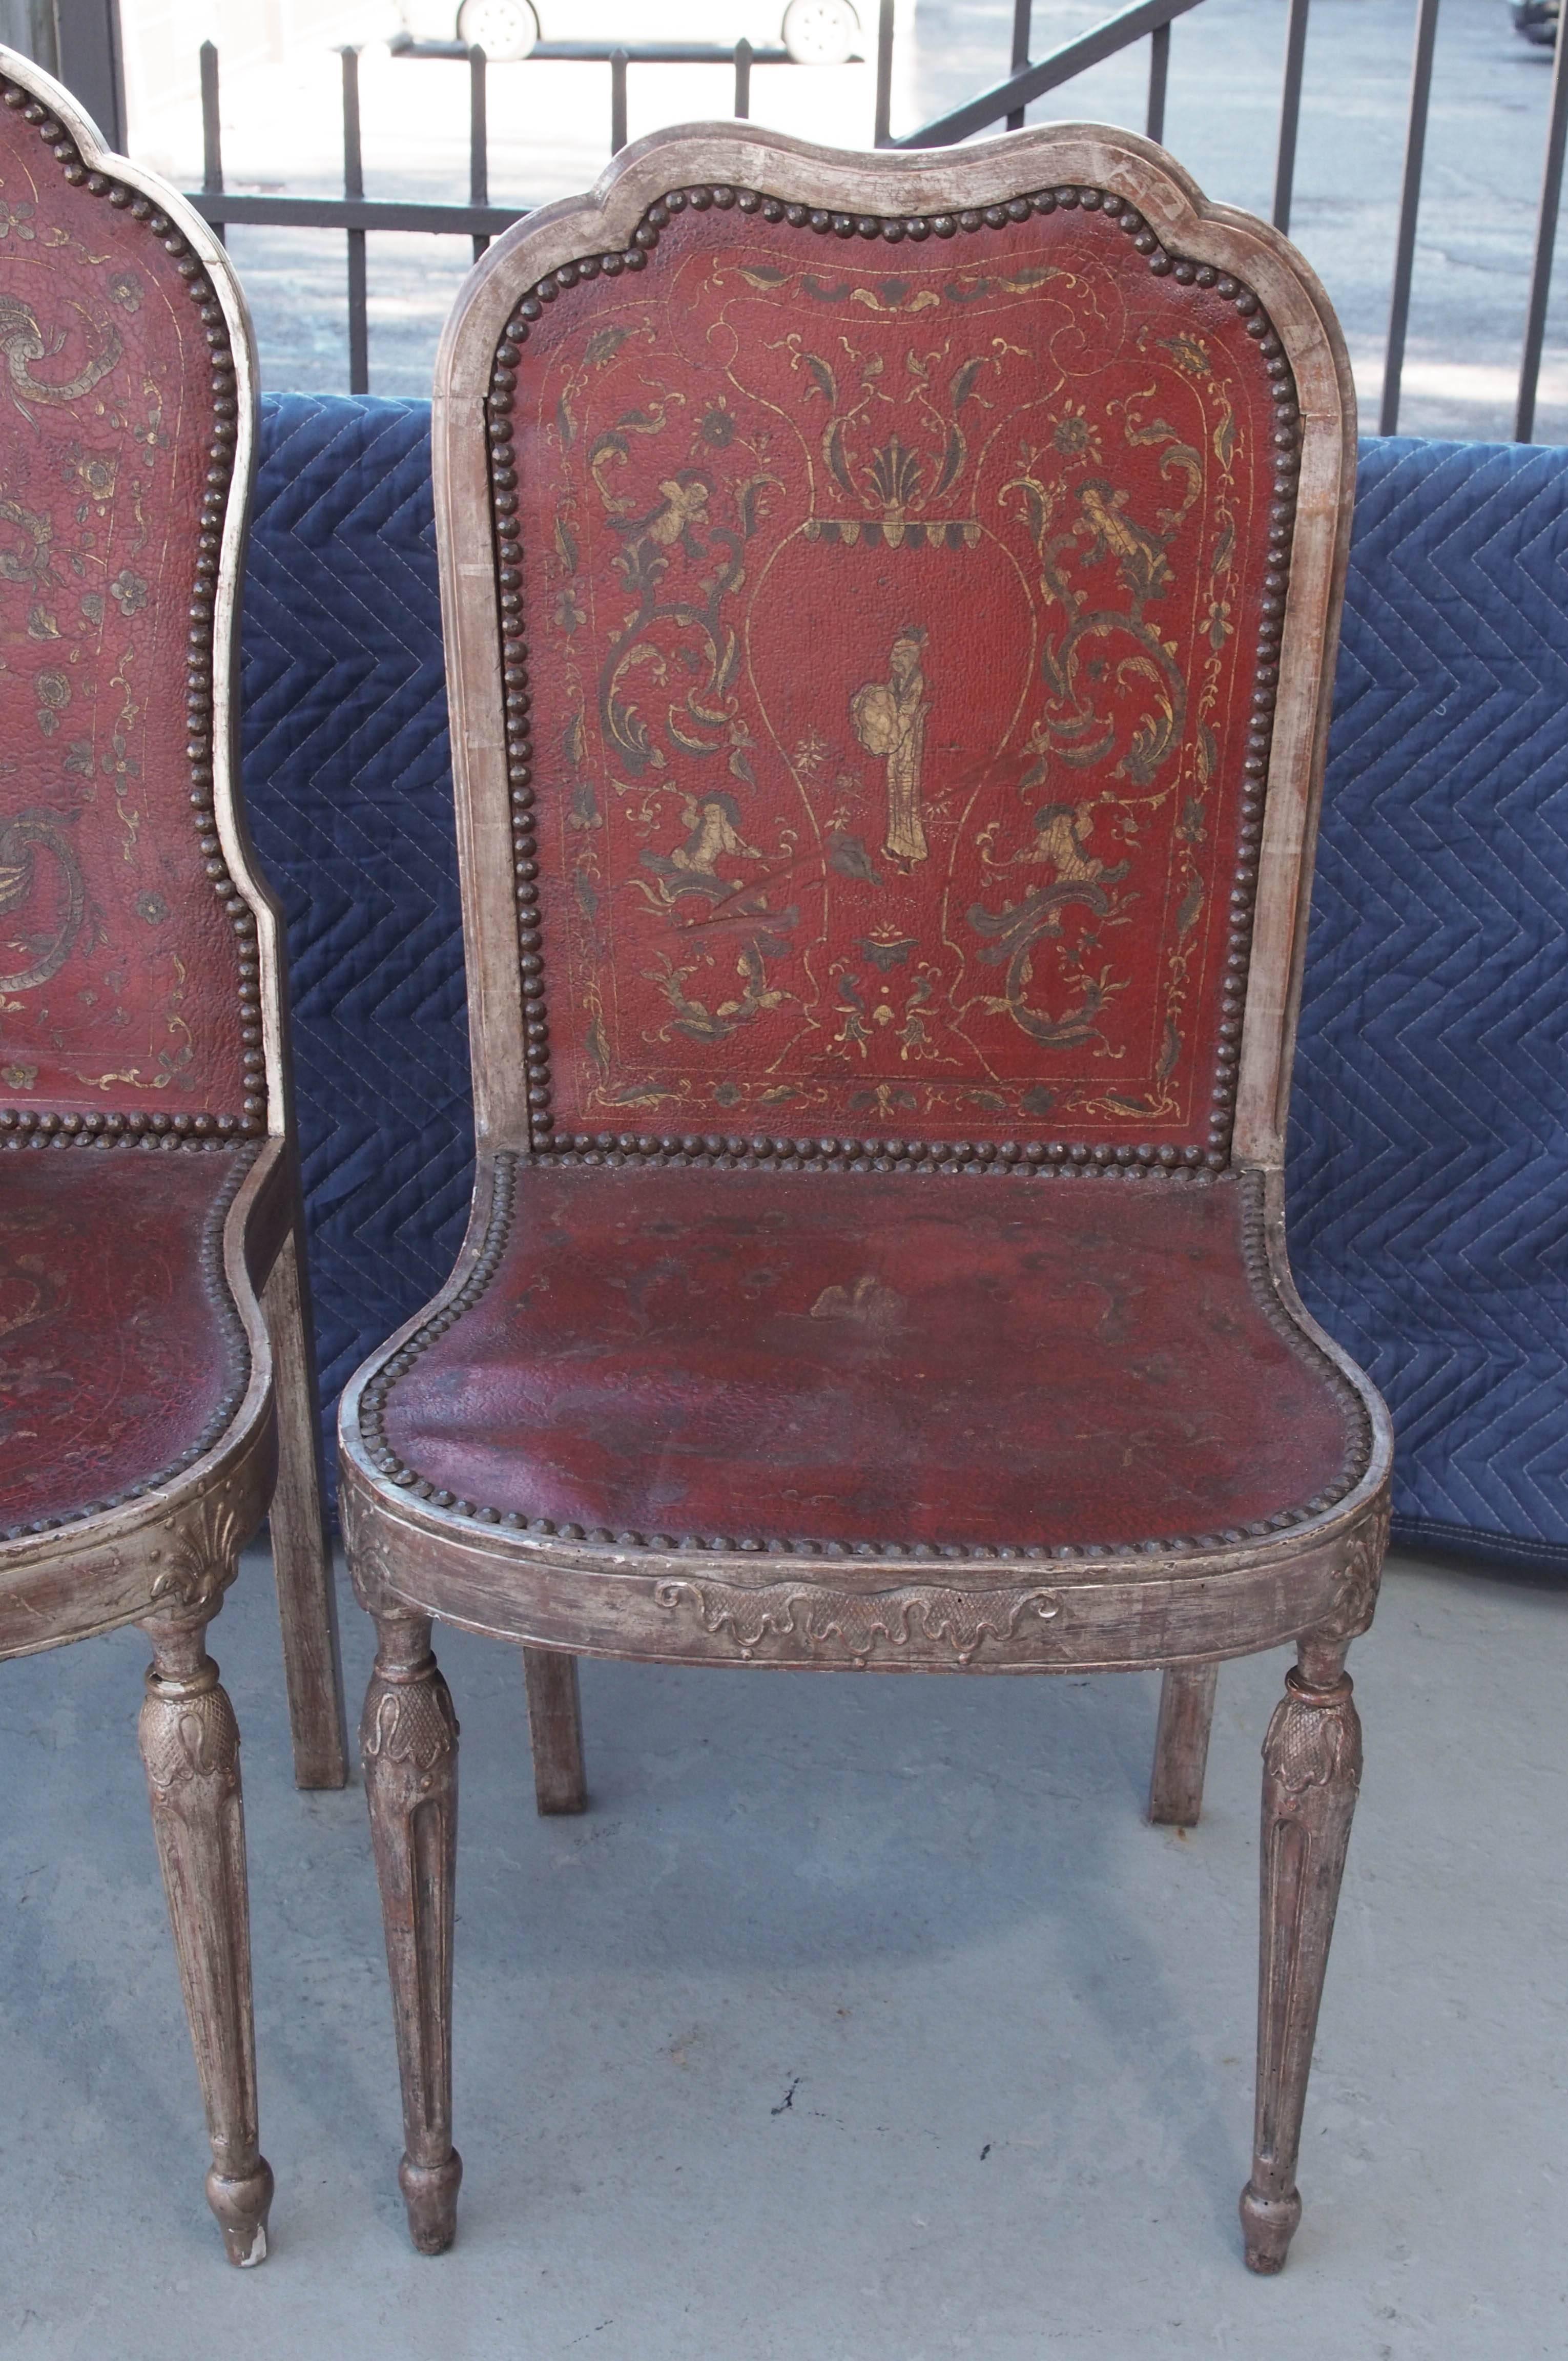 19th Century Two Sets of Four Silver Gilt Chairs with Chinoisorie Leather Seats and Backs